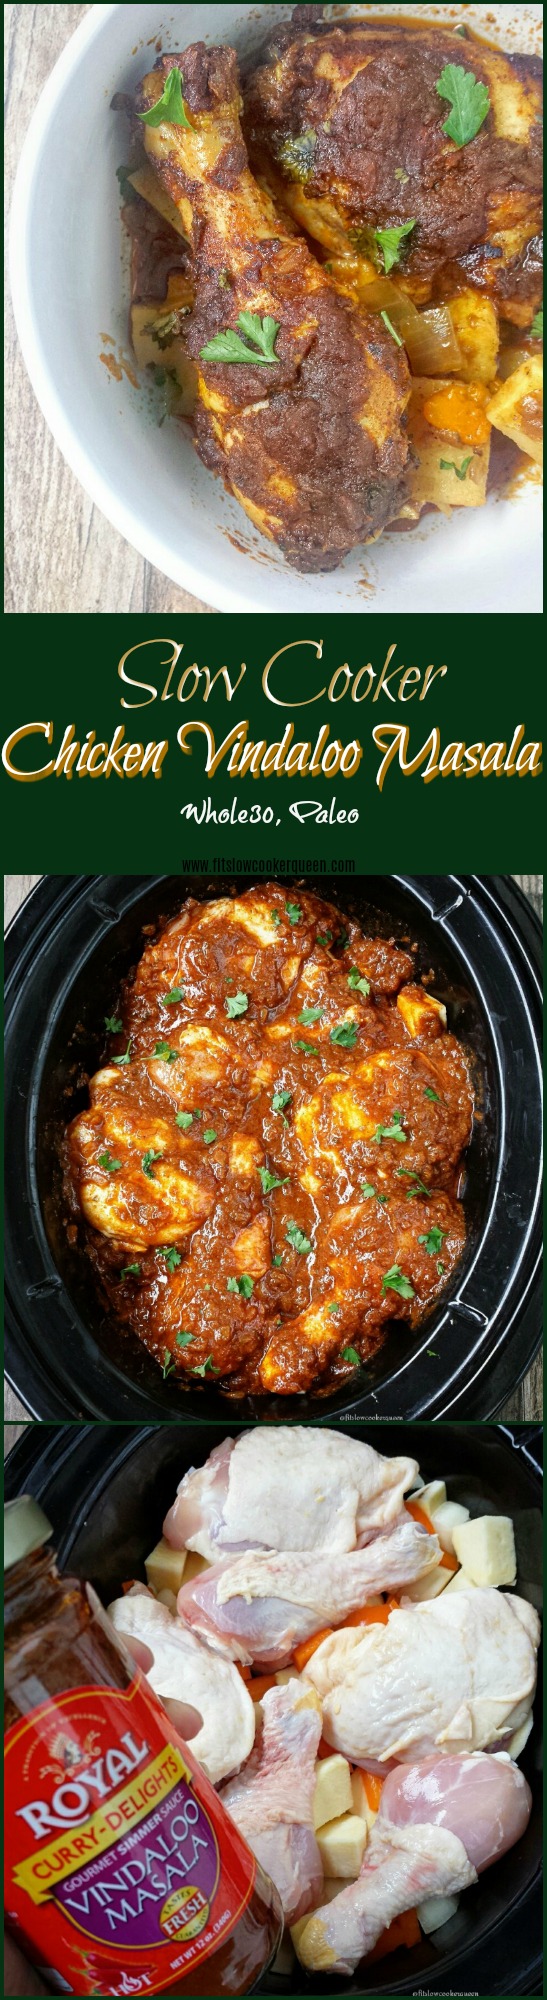 Store-bought Indian sauces usually contain all-natural ingredients. This vindaloo masala sauce is the perfect base for a healthy slow cooker recipe.